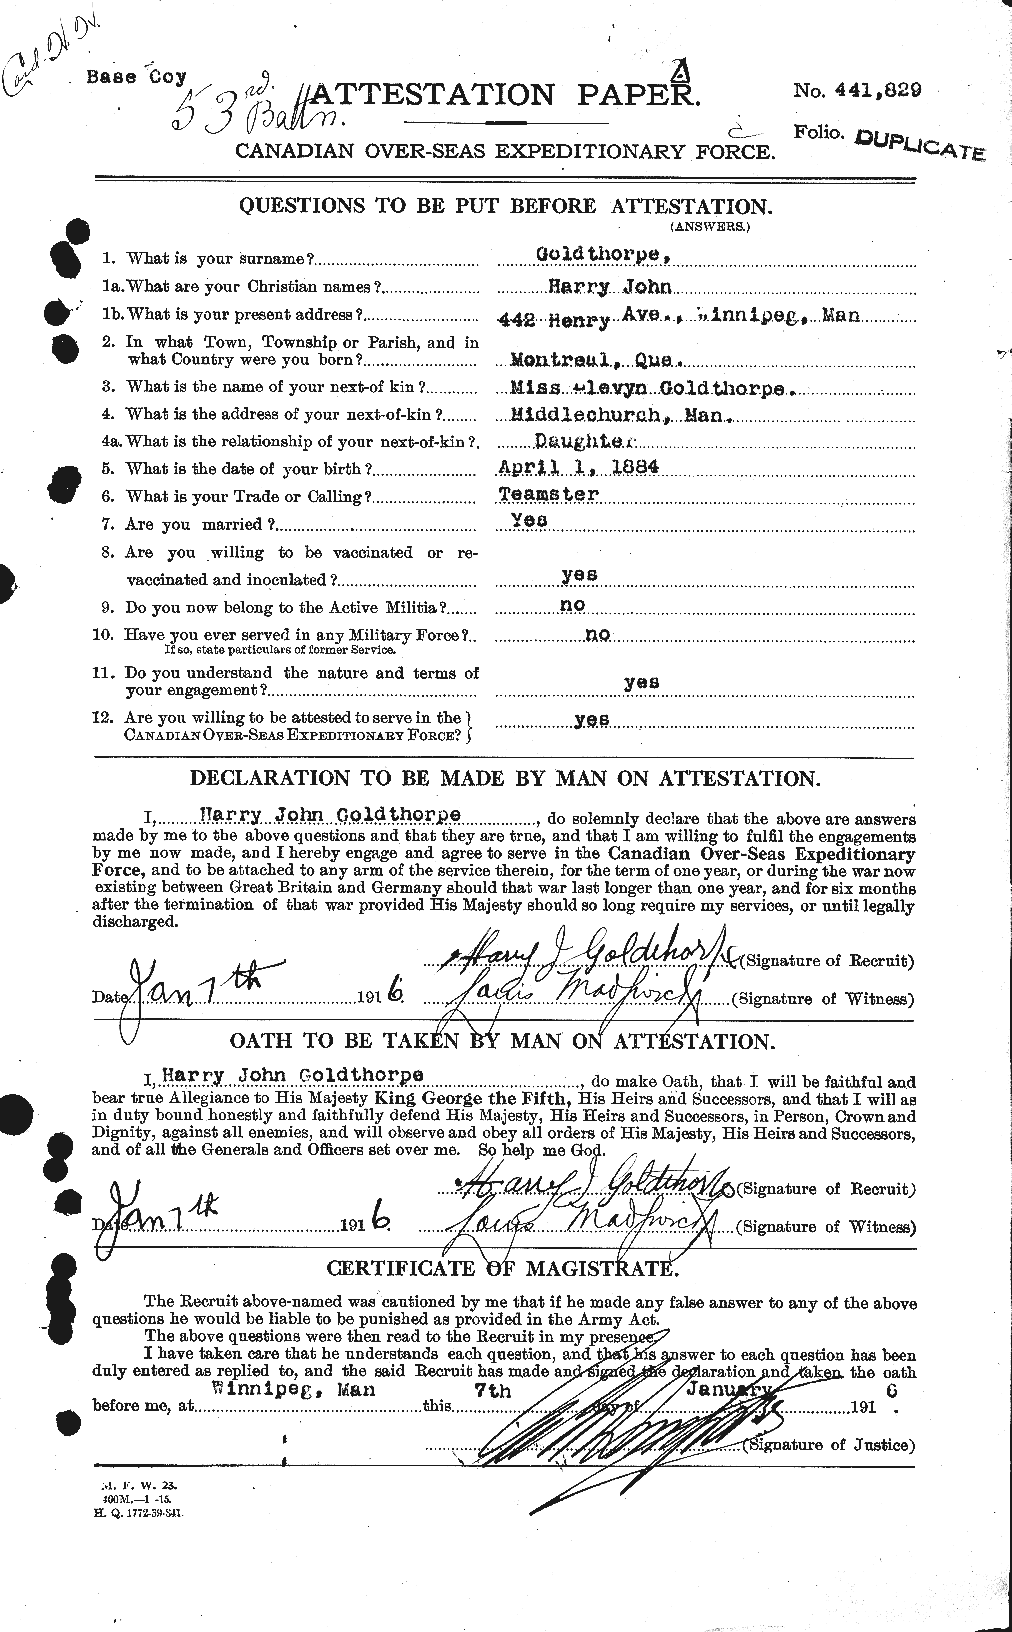 Personnel Records of the First World War - CEF 354164a